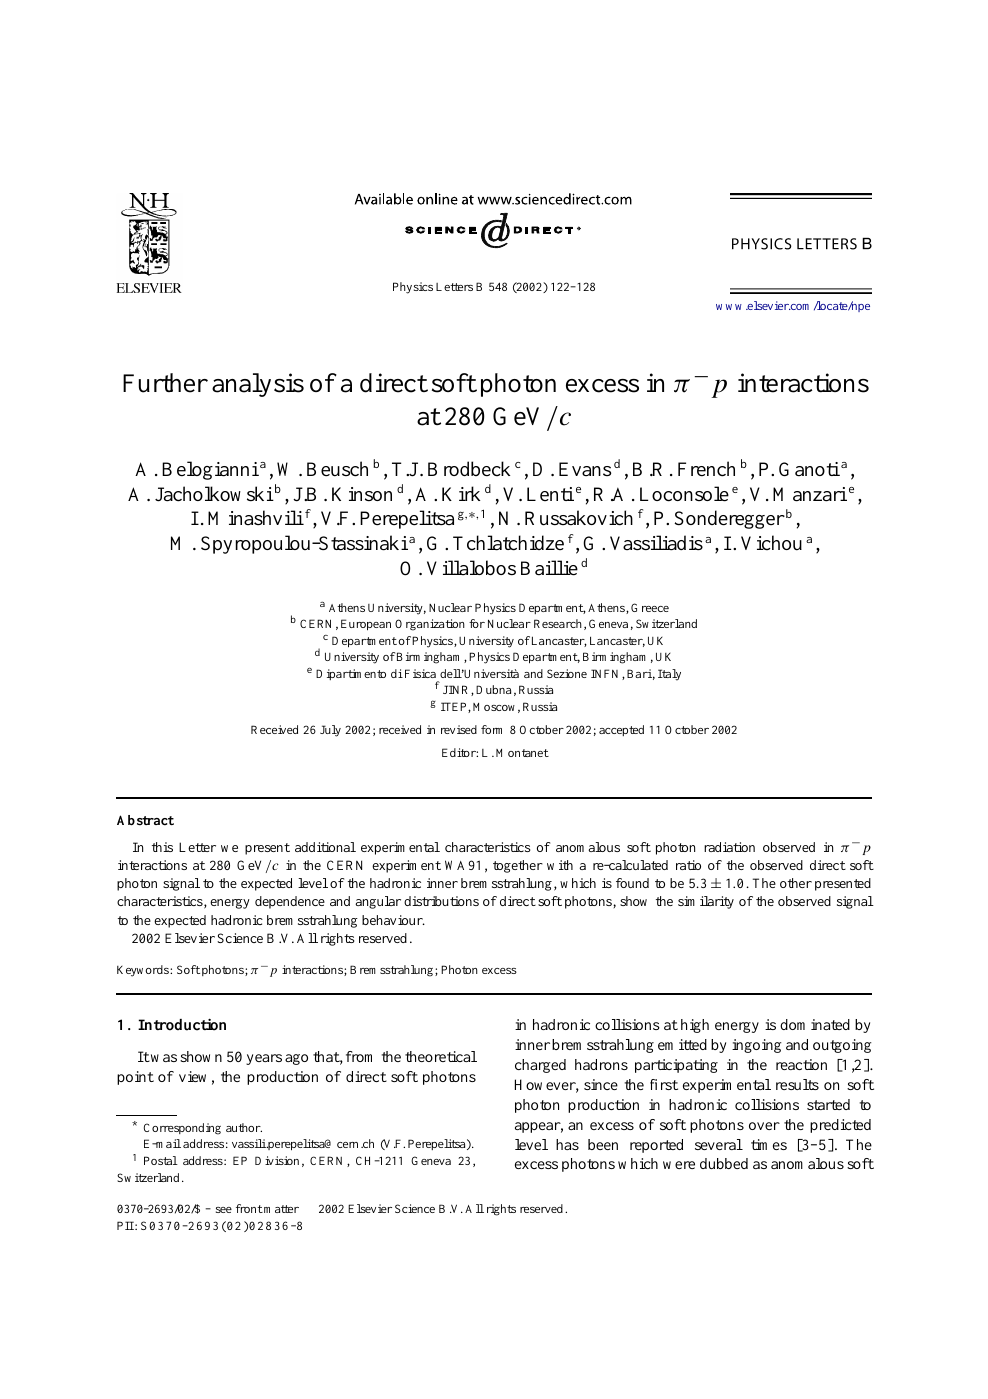 Further Analysis Of A Direct Soft Photon Excess In P P Interactions At 280 Gev C Topic Of Research Paper In Physical Sciences Download Scholarly Article Pdf And Read For Free On Cyberleninka